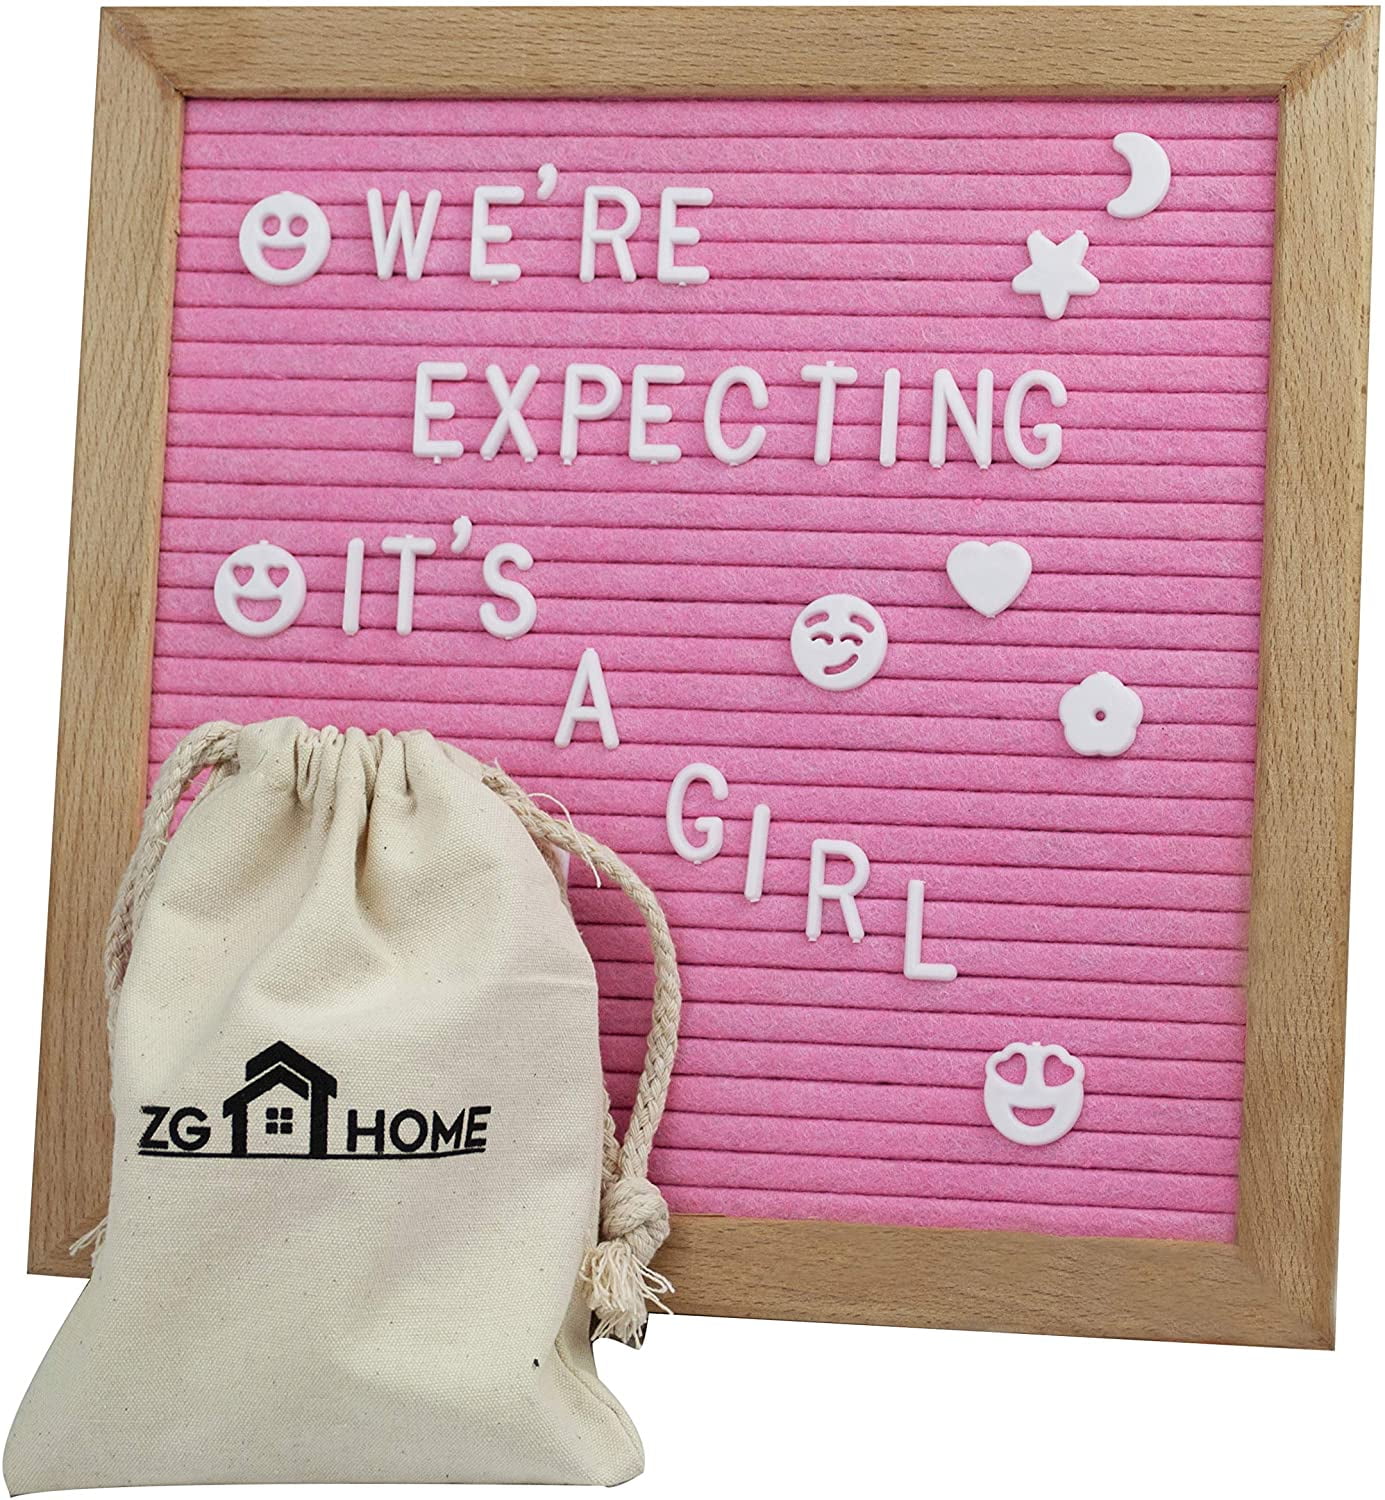 10x10 Inch Wooden Message Board Includes Sign Numbers Symbols Emojis with Solid Oak Frame Free Stand Scissor Canvas Bag ROSE KULI Changeable Felt Letter Board 